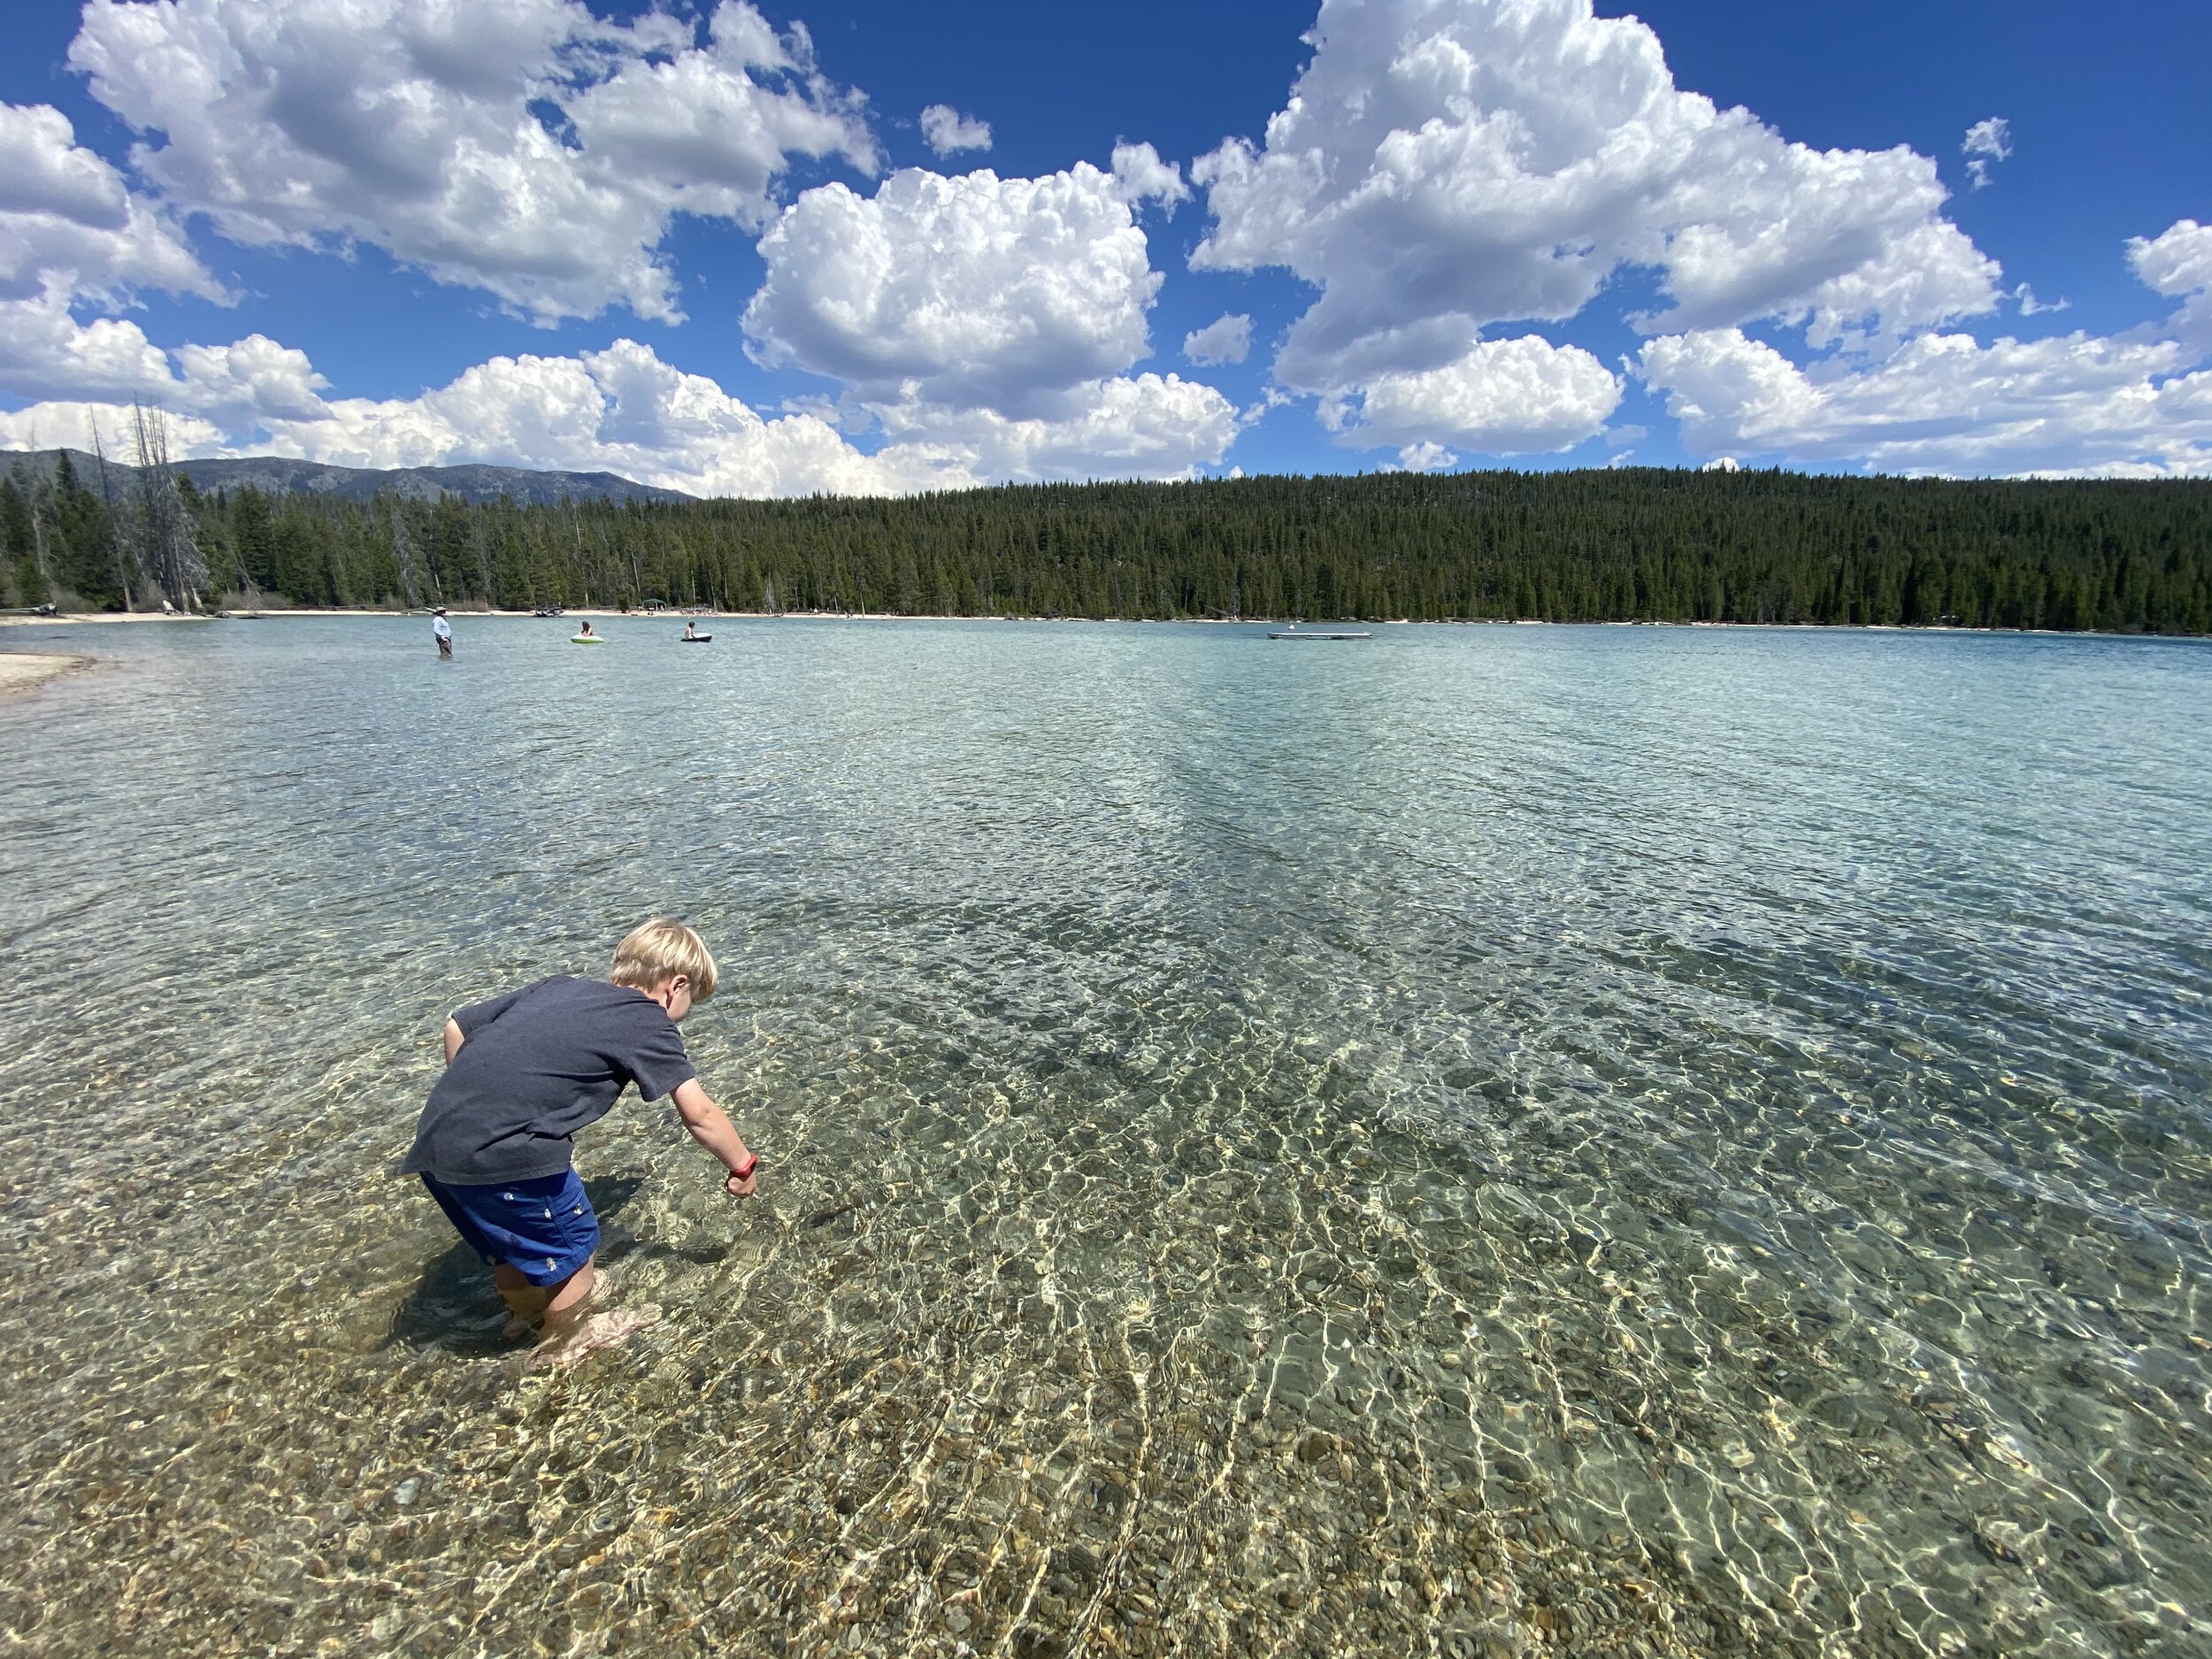 Popcorn plays in Redfish Lake in the Sawtooth Mountains.  Photo by Karen Boudreaux, June 3, 2021